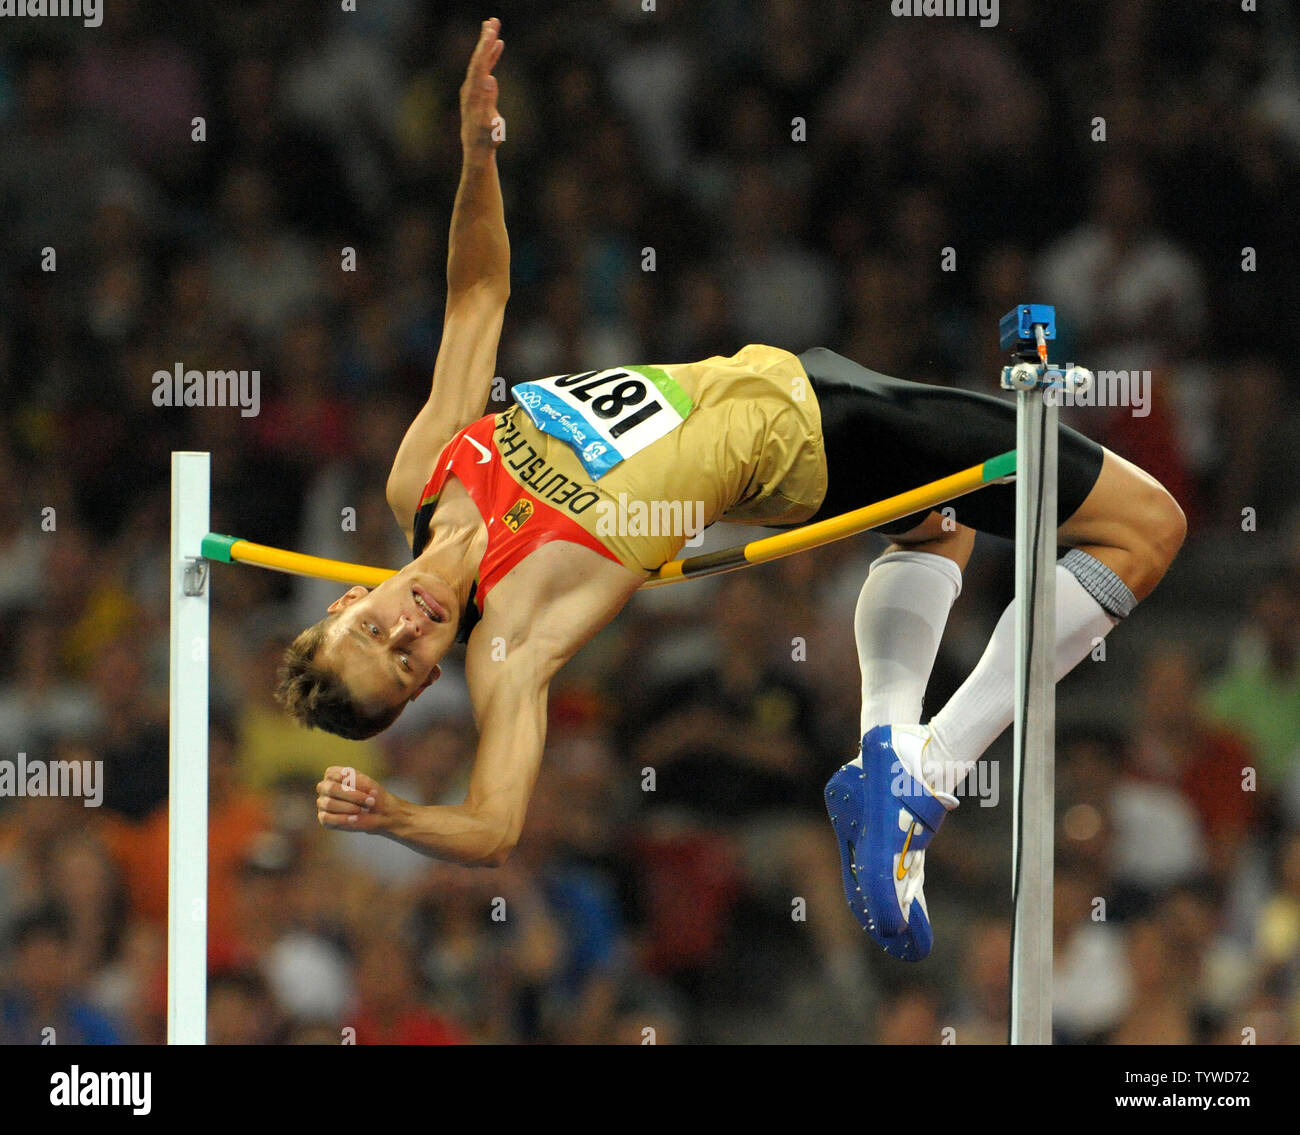 Germany's Raul-Roland Spank misses the 2.36 meter mark, finishing in fifth  place in the Men's High Jump at the National Stadium (Bird's Nest) during  the 2008 Summer Olympics in Beijing on August